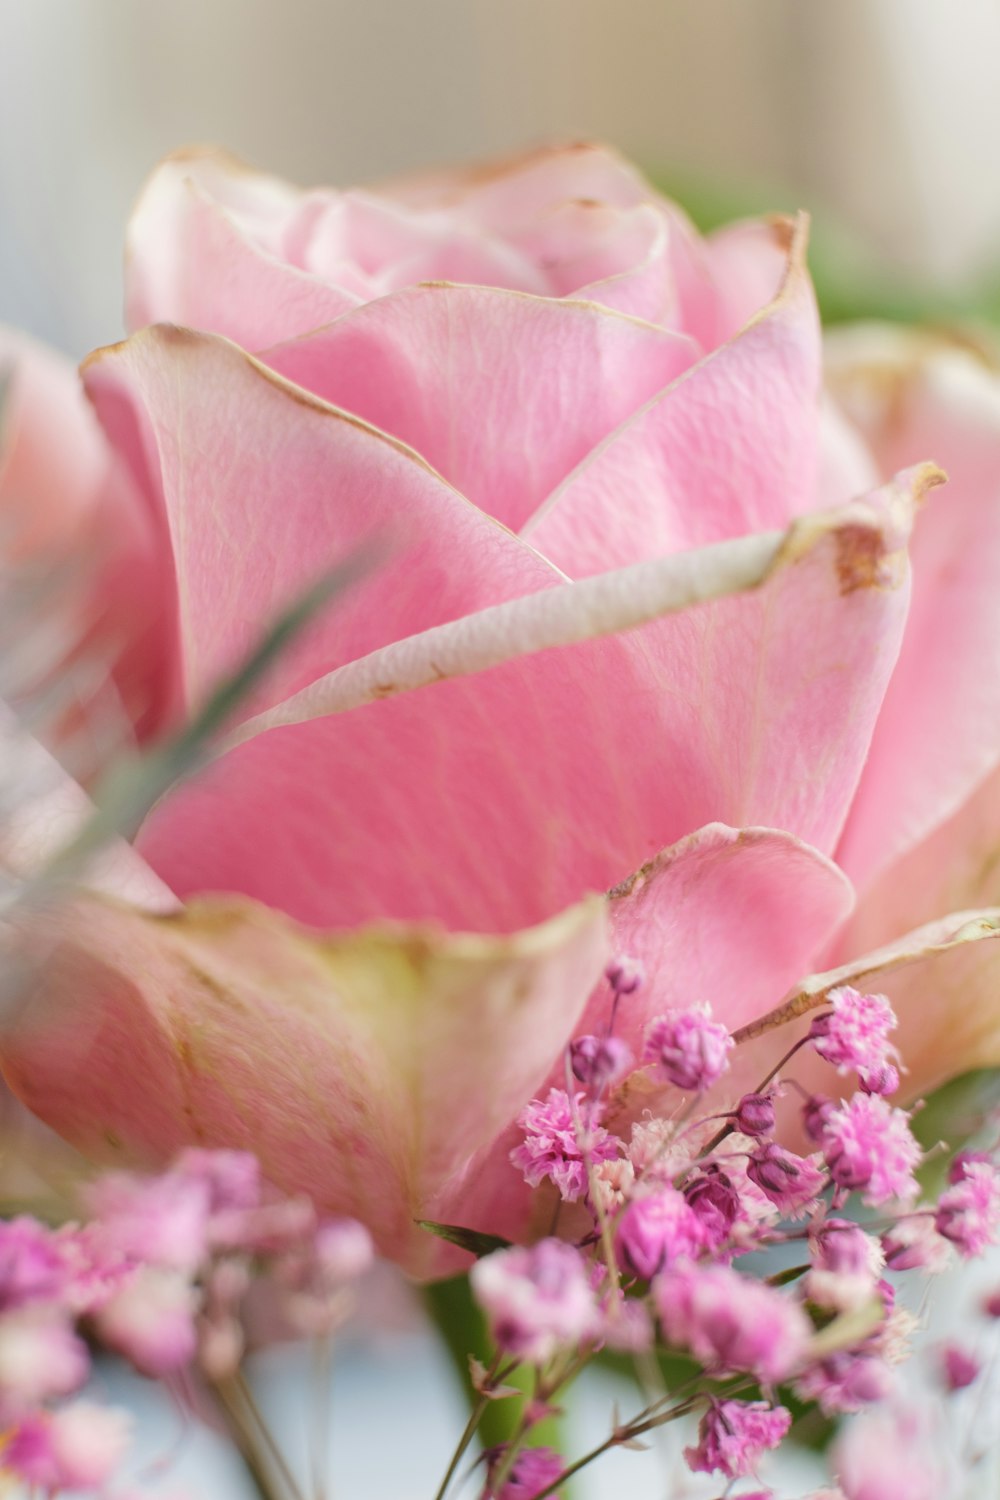 a close up of a pink rose on a table